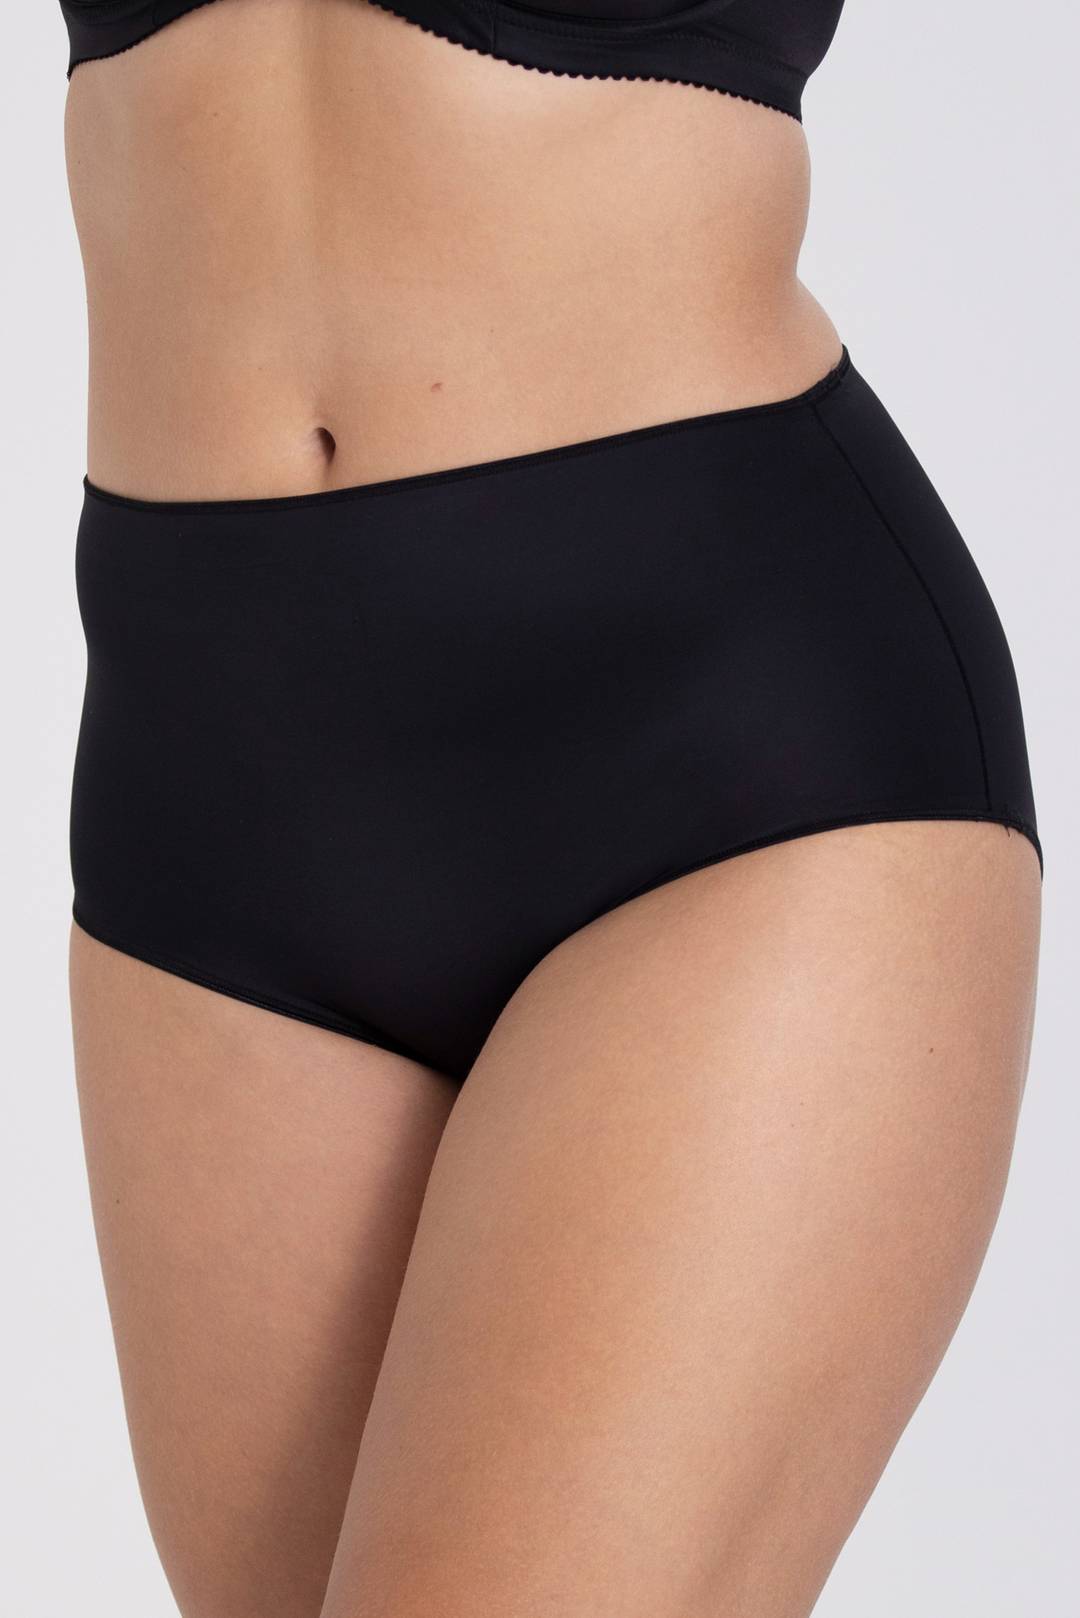 Recycled Comfort maxi panty - Soft and comfortable material made